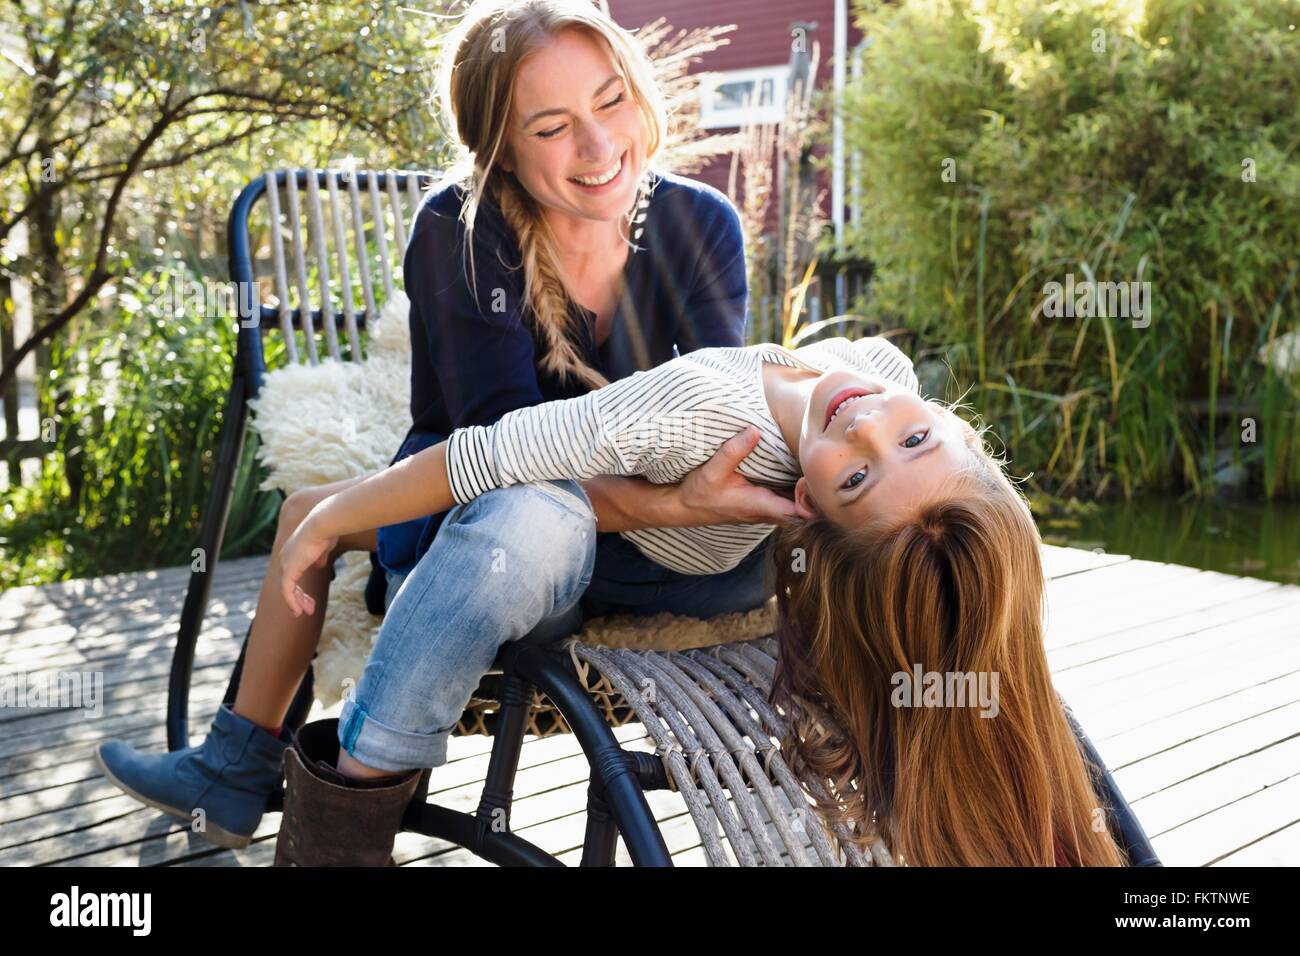 Girl sitting on mother's lap, leaning back Stock Photo